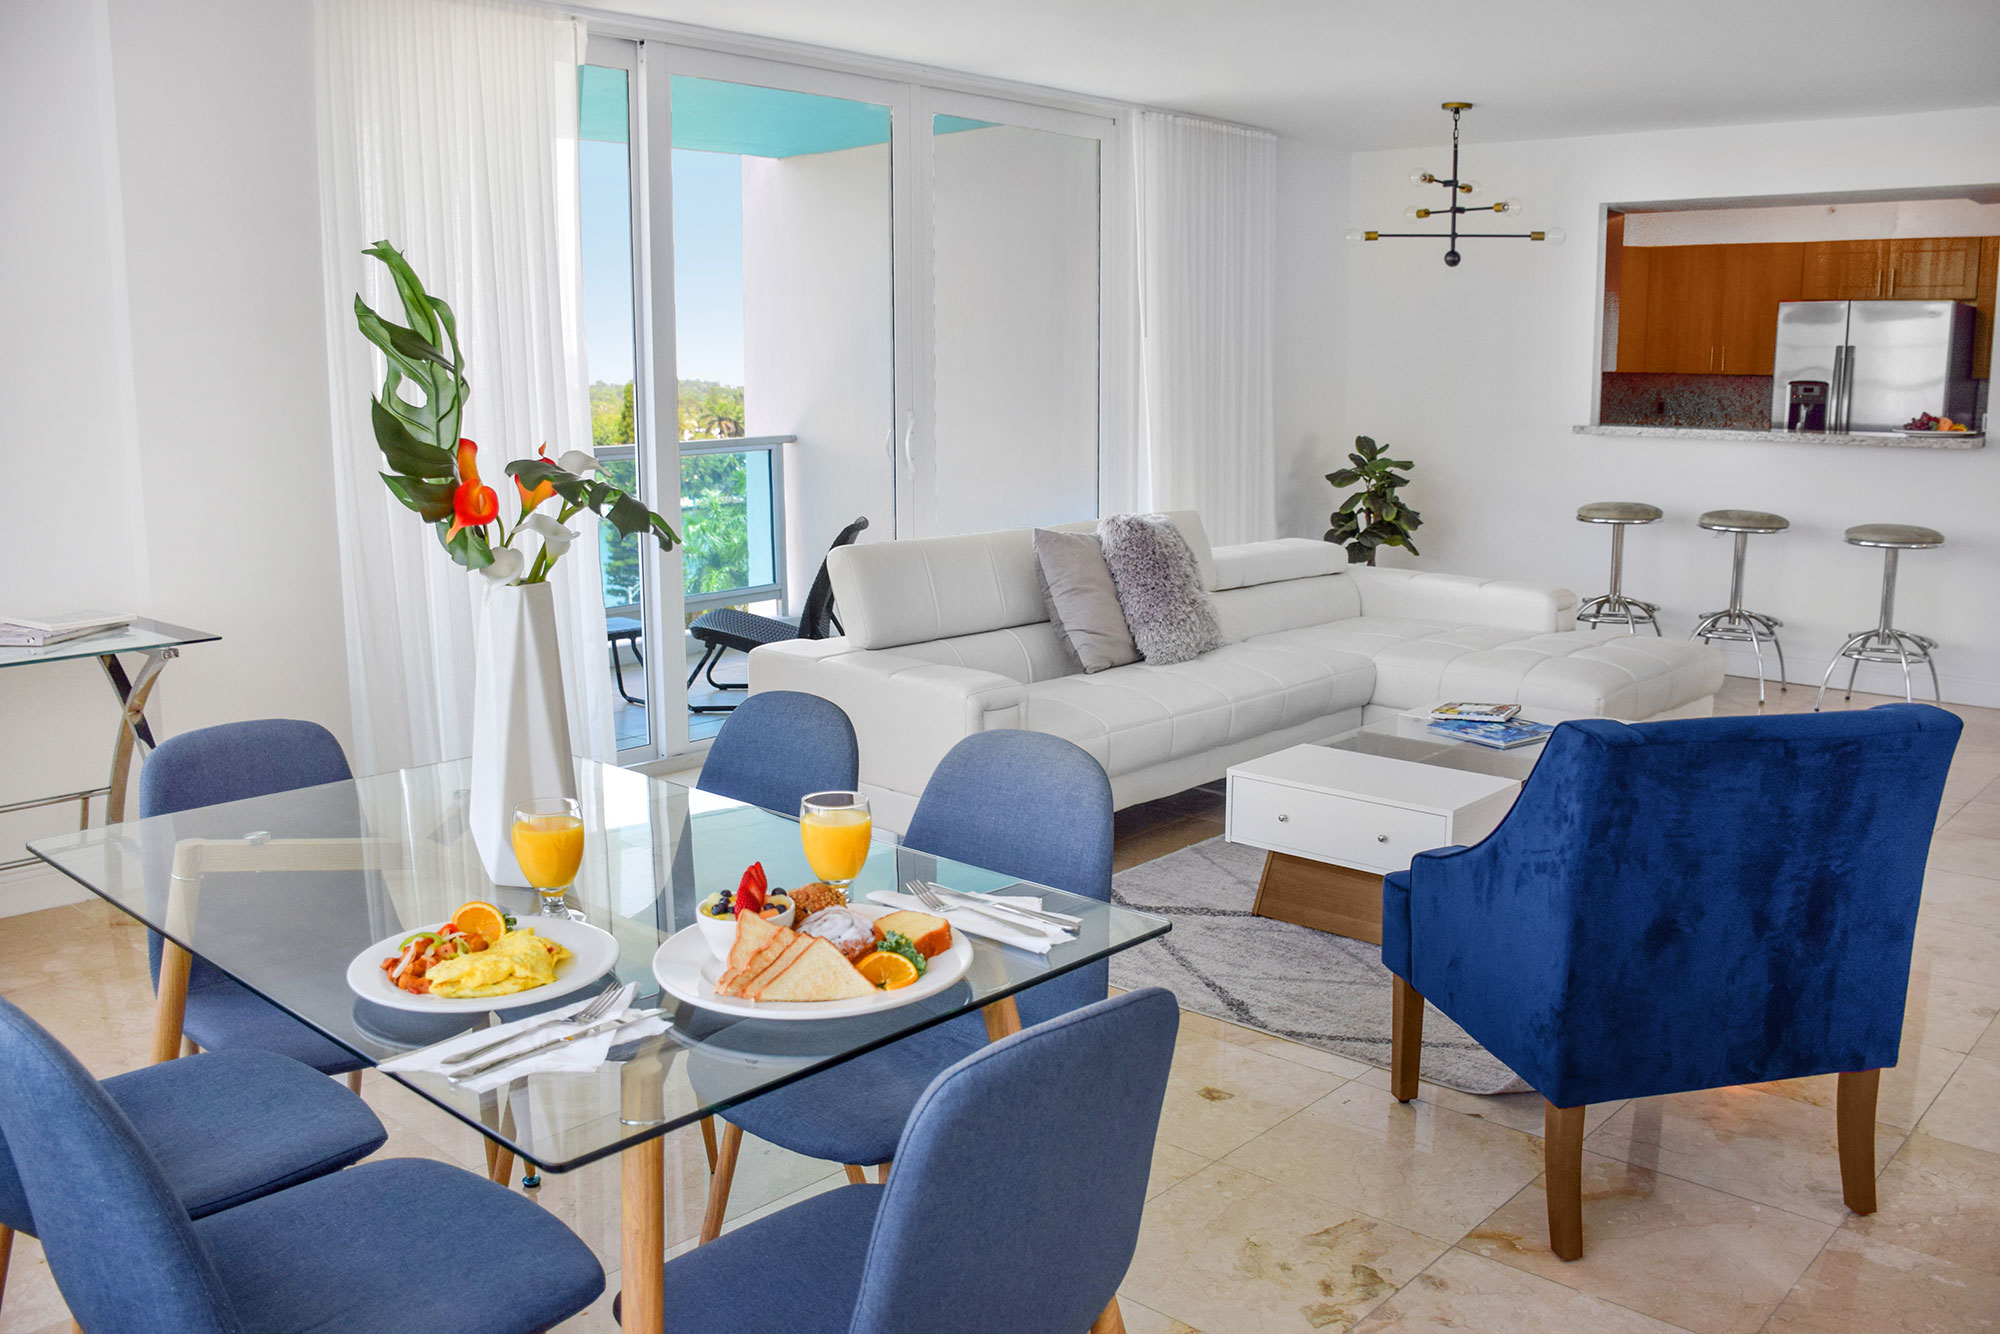 Photo Gallery | Seacoast Suites Miami Beach | Oceanfront Hotel